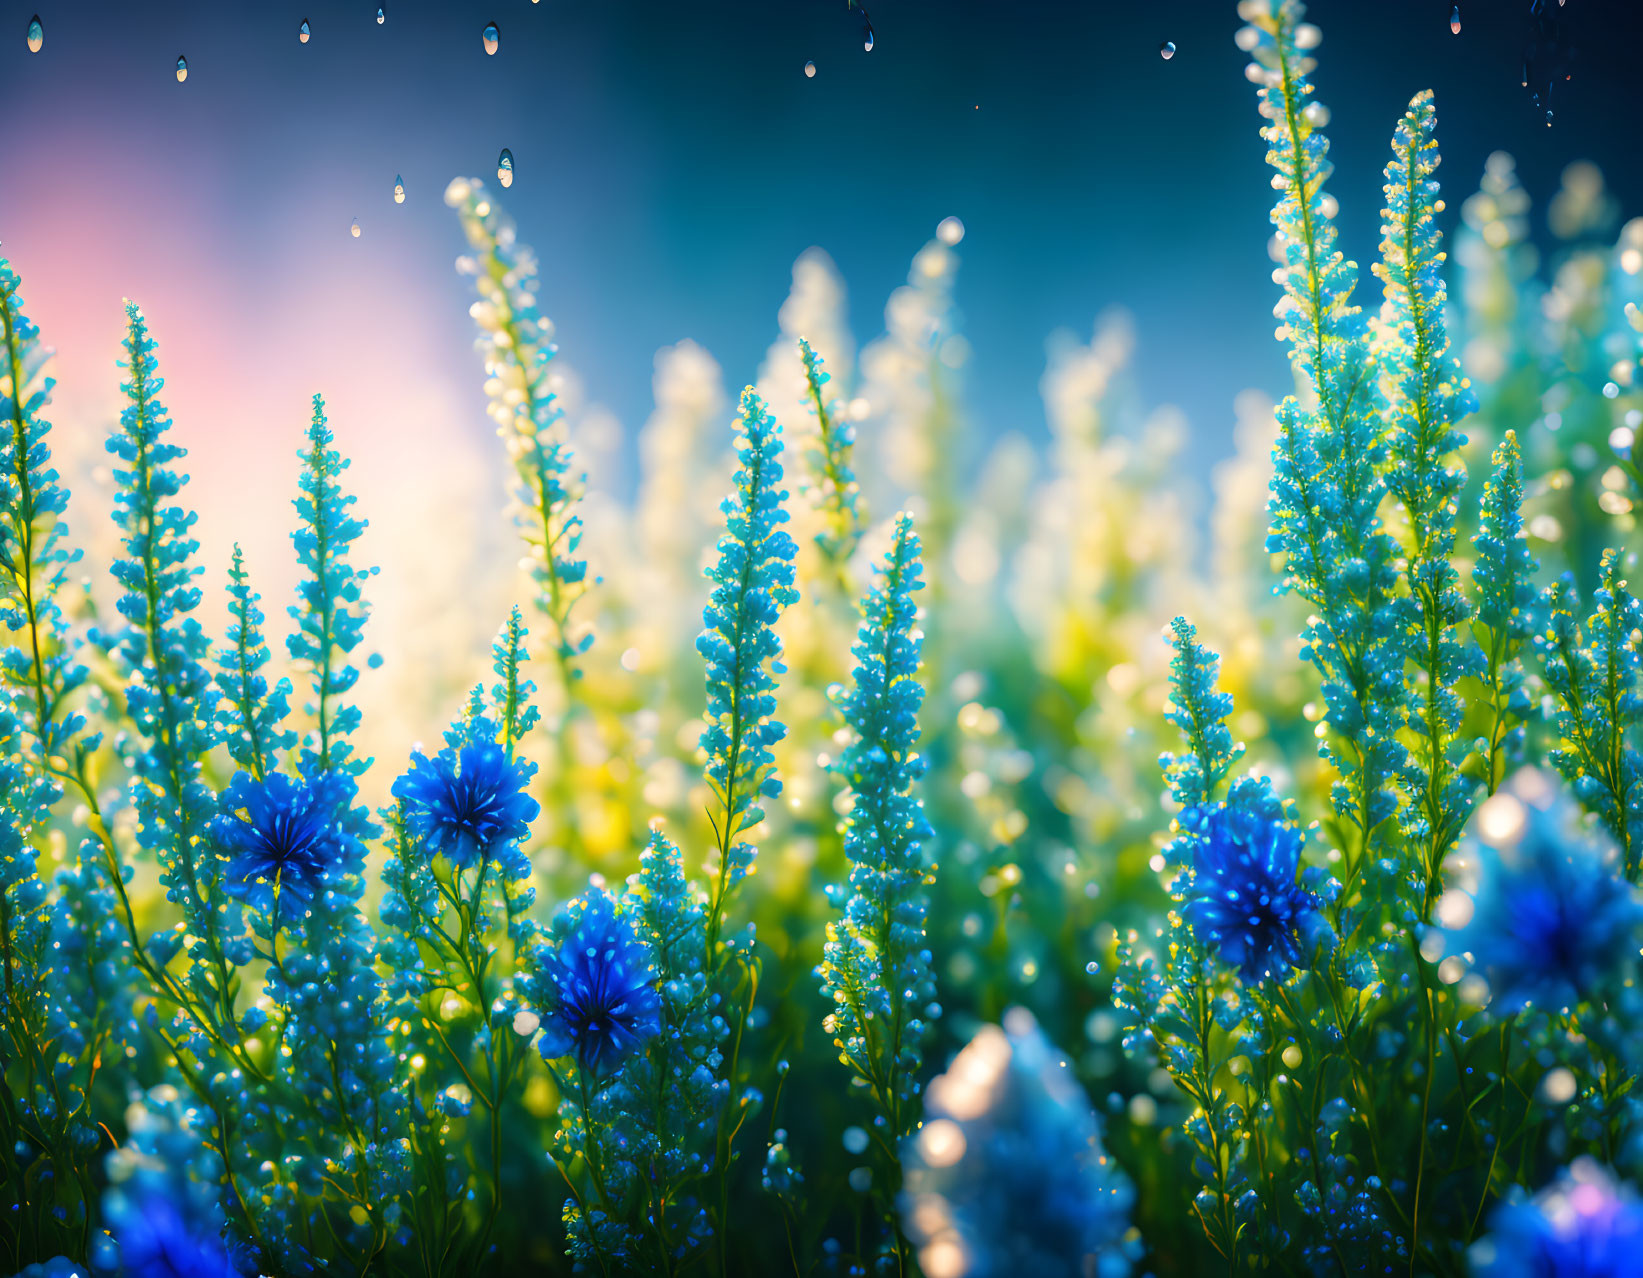 Vibrant Blue and Green Flower Field with Dew Drops and Soft Light